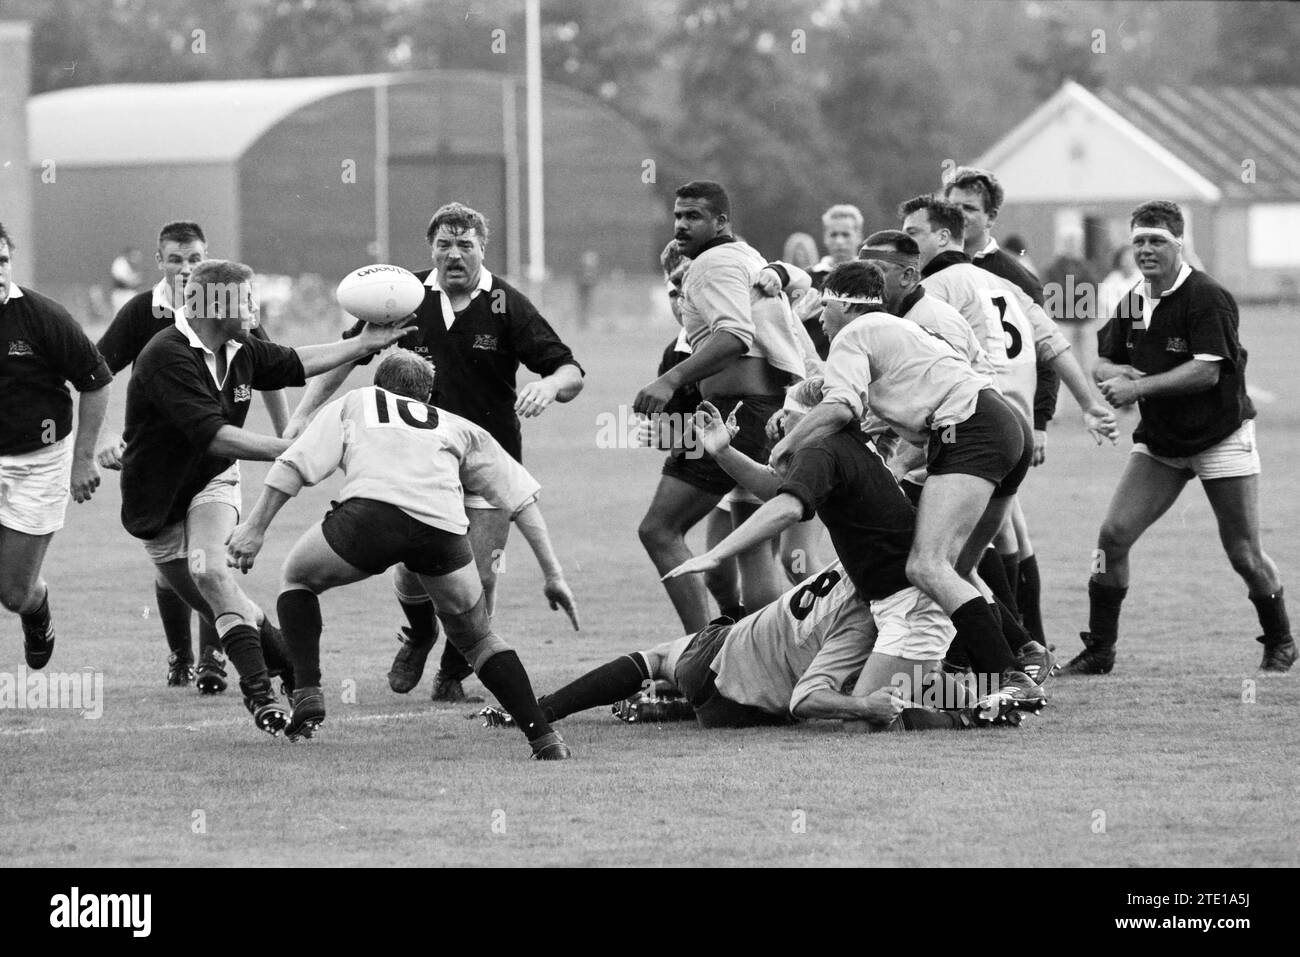 Rugby, Haarlem - HRC [Haagsche Rugby Club], 11-09-1993, Whizgle News from the Past, Tailored for the Future. Explore historical narratives, Dutch The Netherlands agency image with a modern perspective, bridging the gap between yesterday's events and tomorrow's insights. A timeless journey shaping the stories that shape our future. Stock Photo